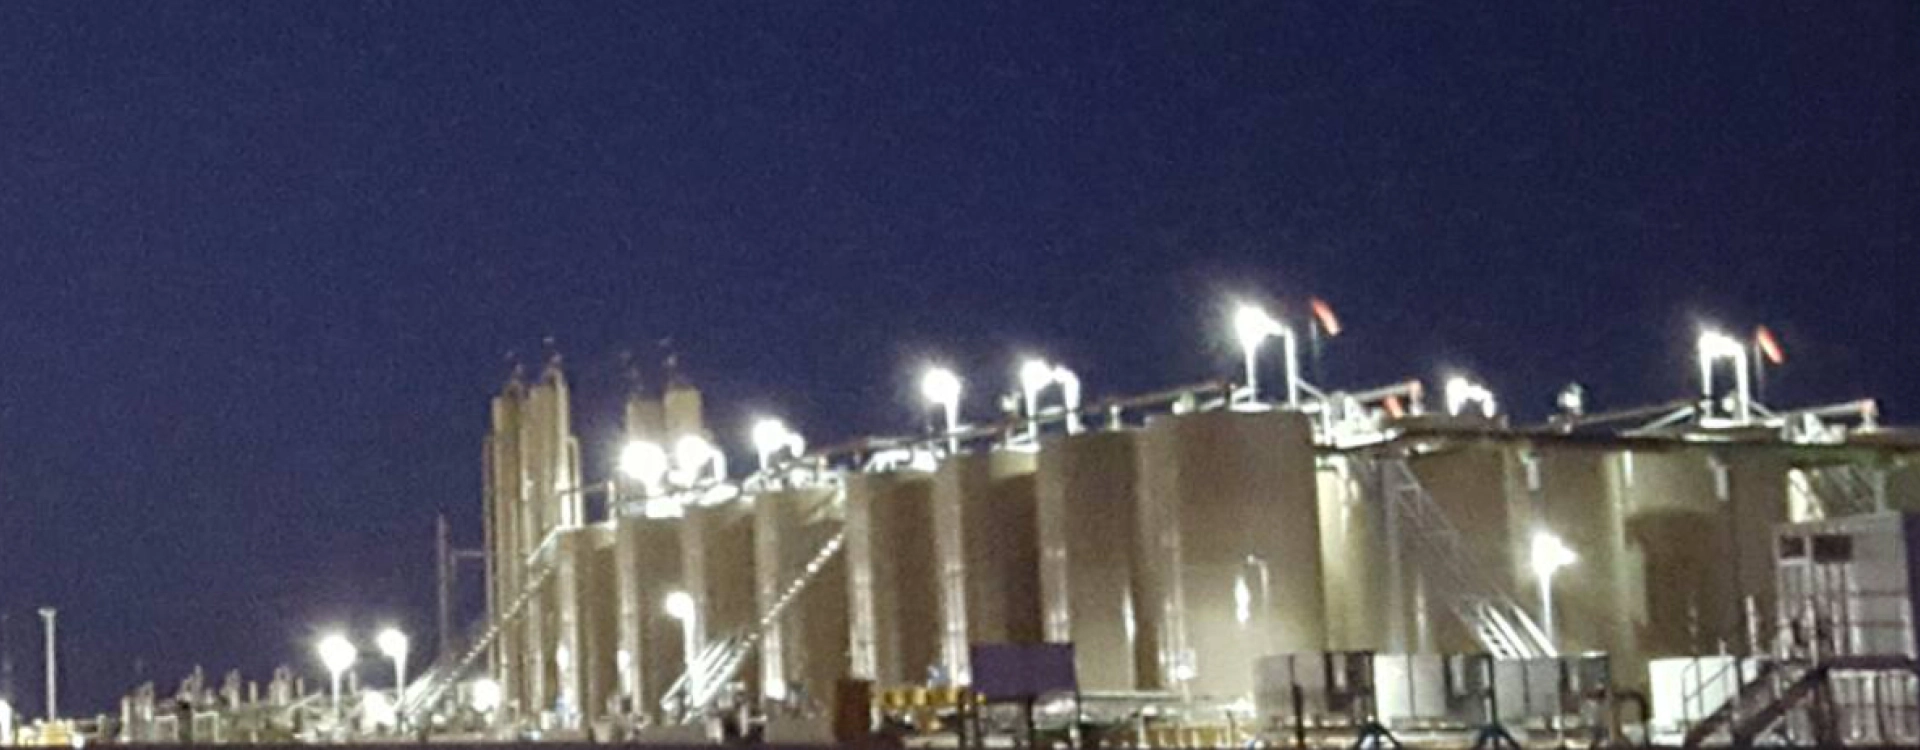 building factory with lights at night odessa tx